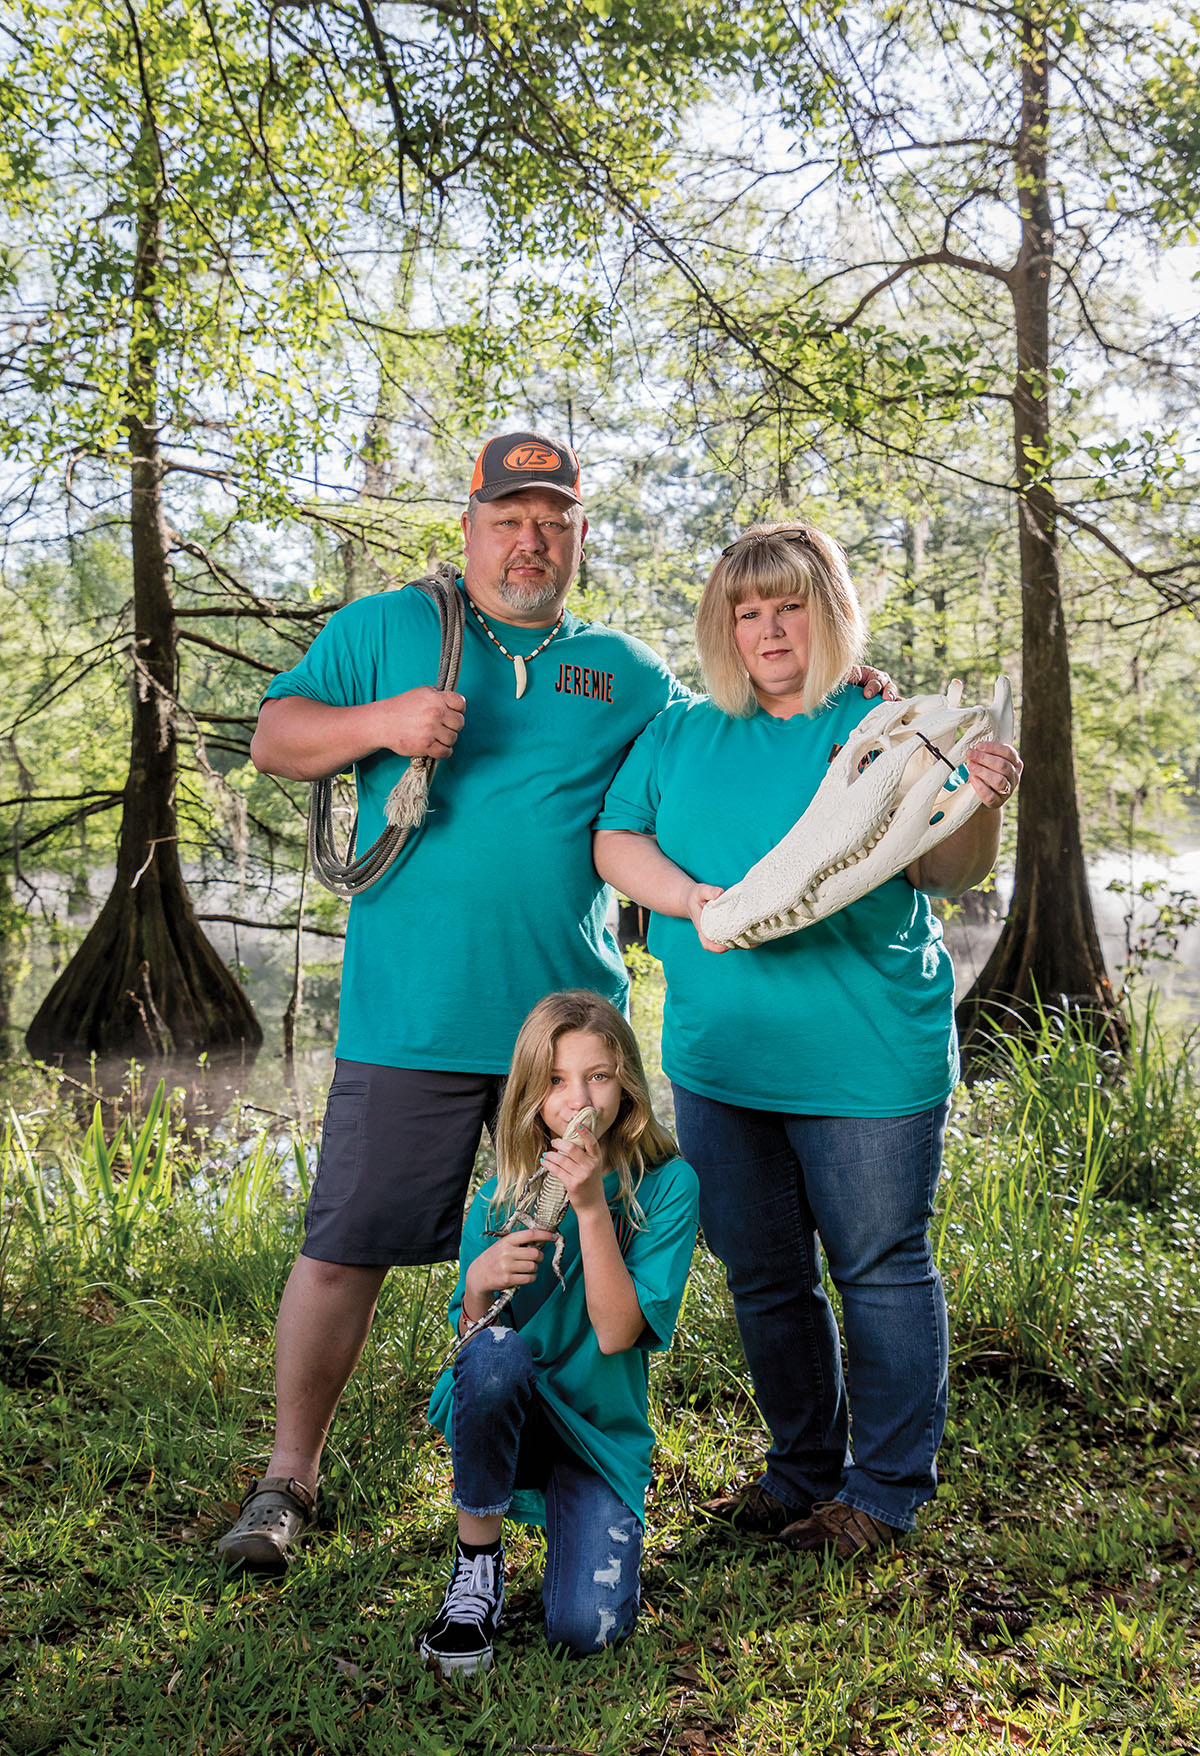 Jeremie Estillette, a certified alligator rescue professional, poses with his wife, Kim, and daughter, Kallie, along with some alligator paraphernalia